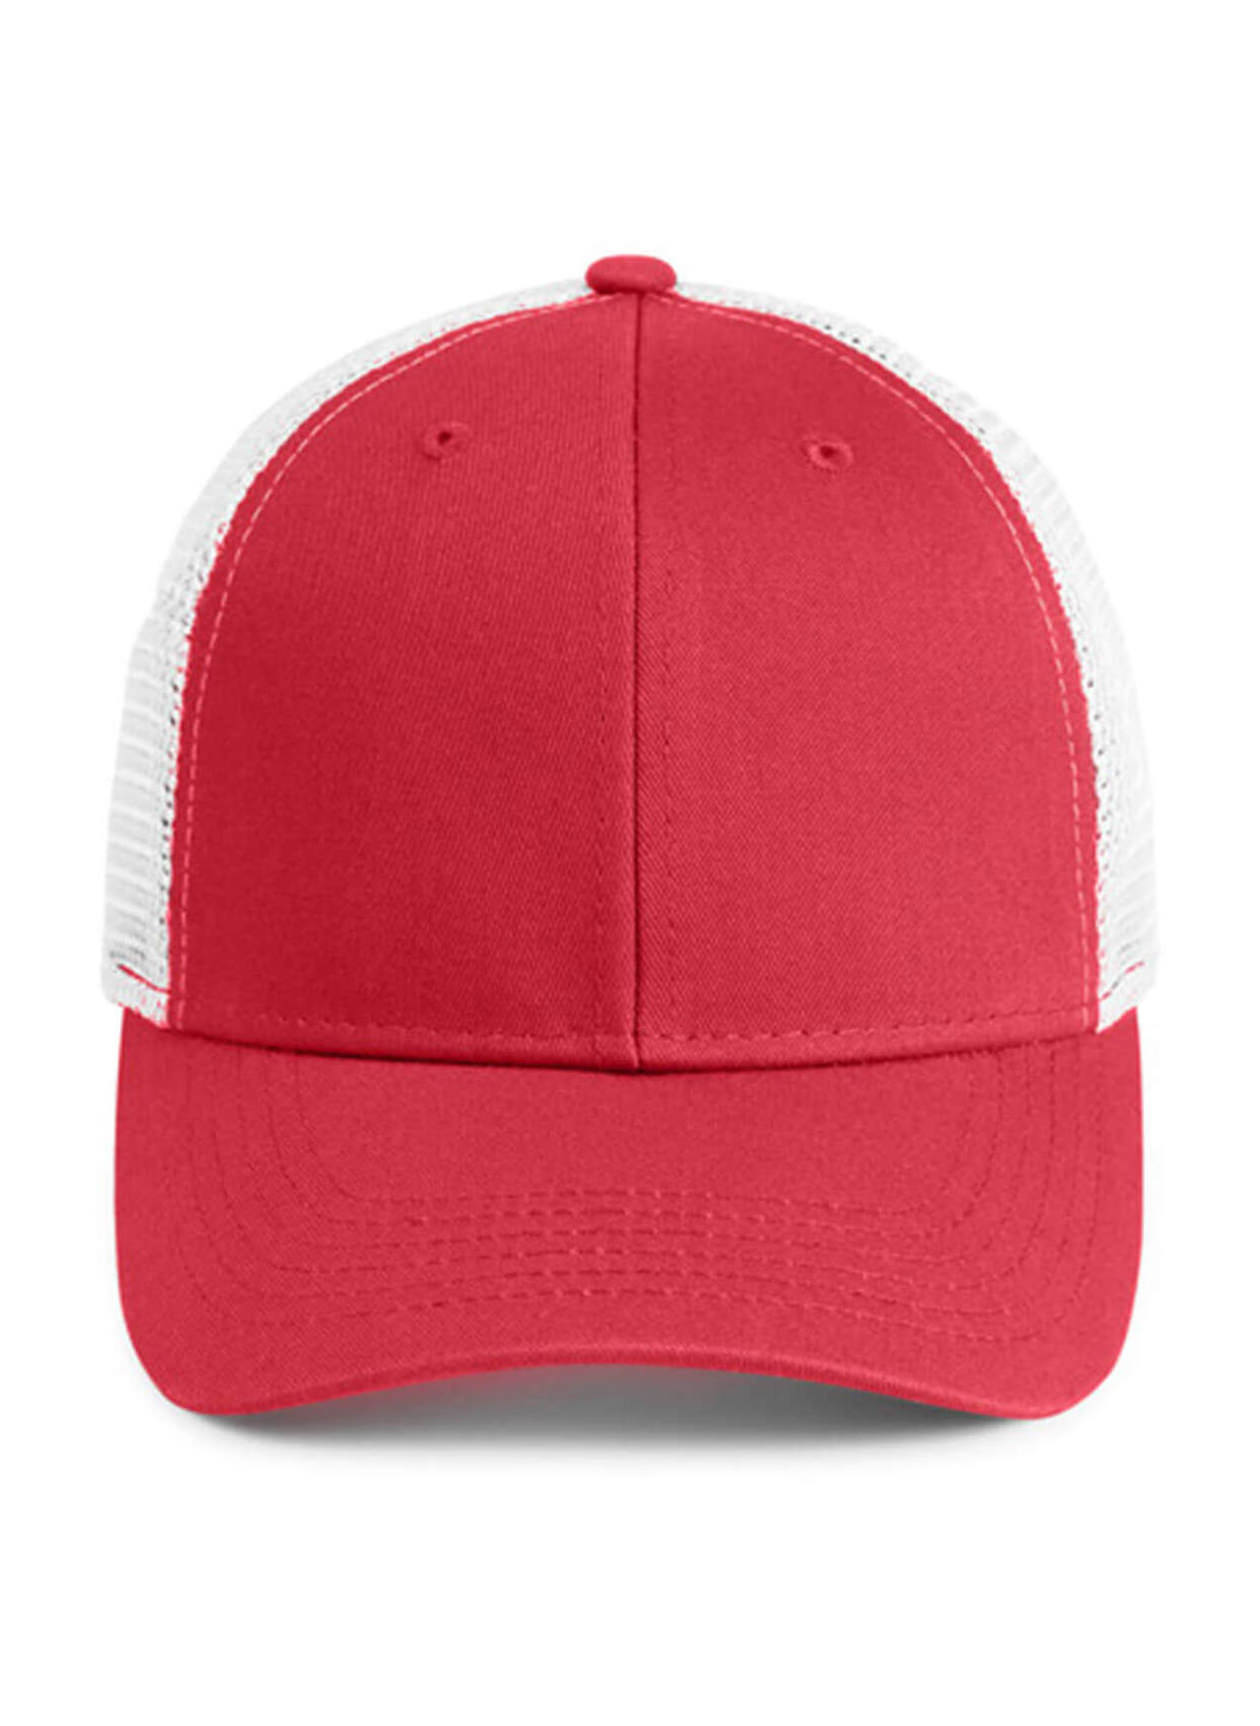 Imperial Red / White The Catch & Release Hat Adjustable Meshback Hat